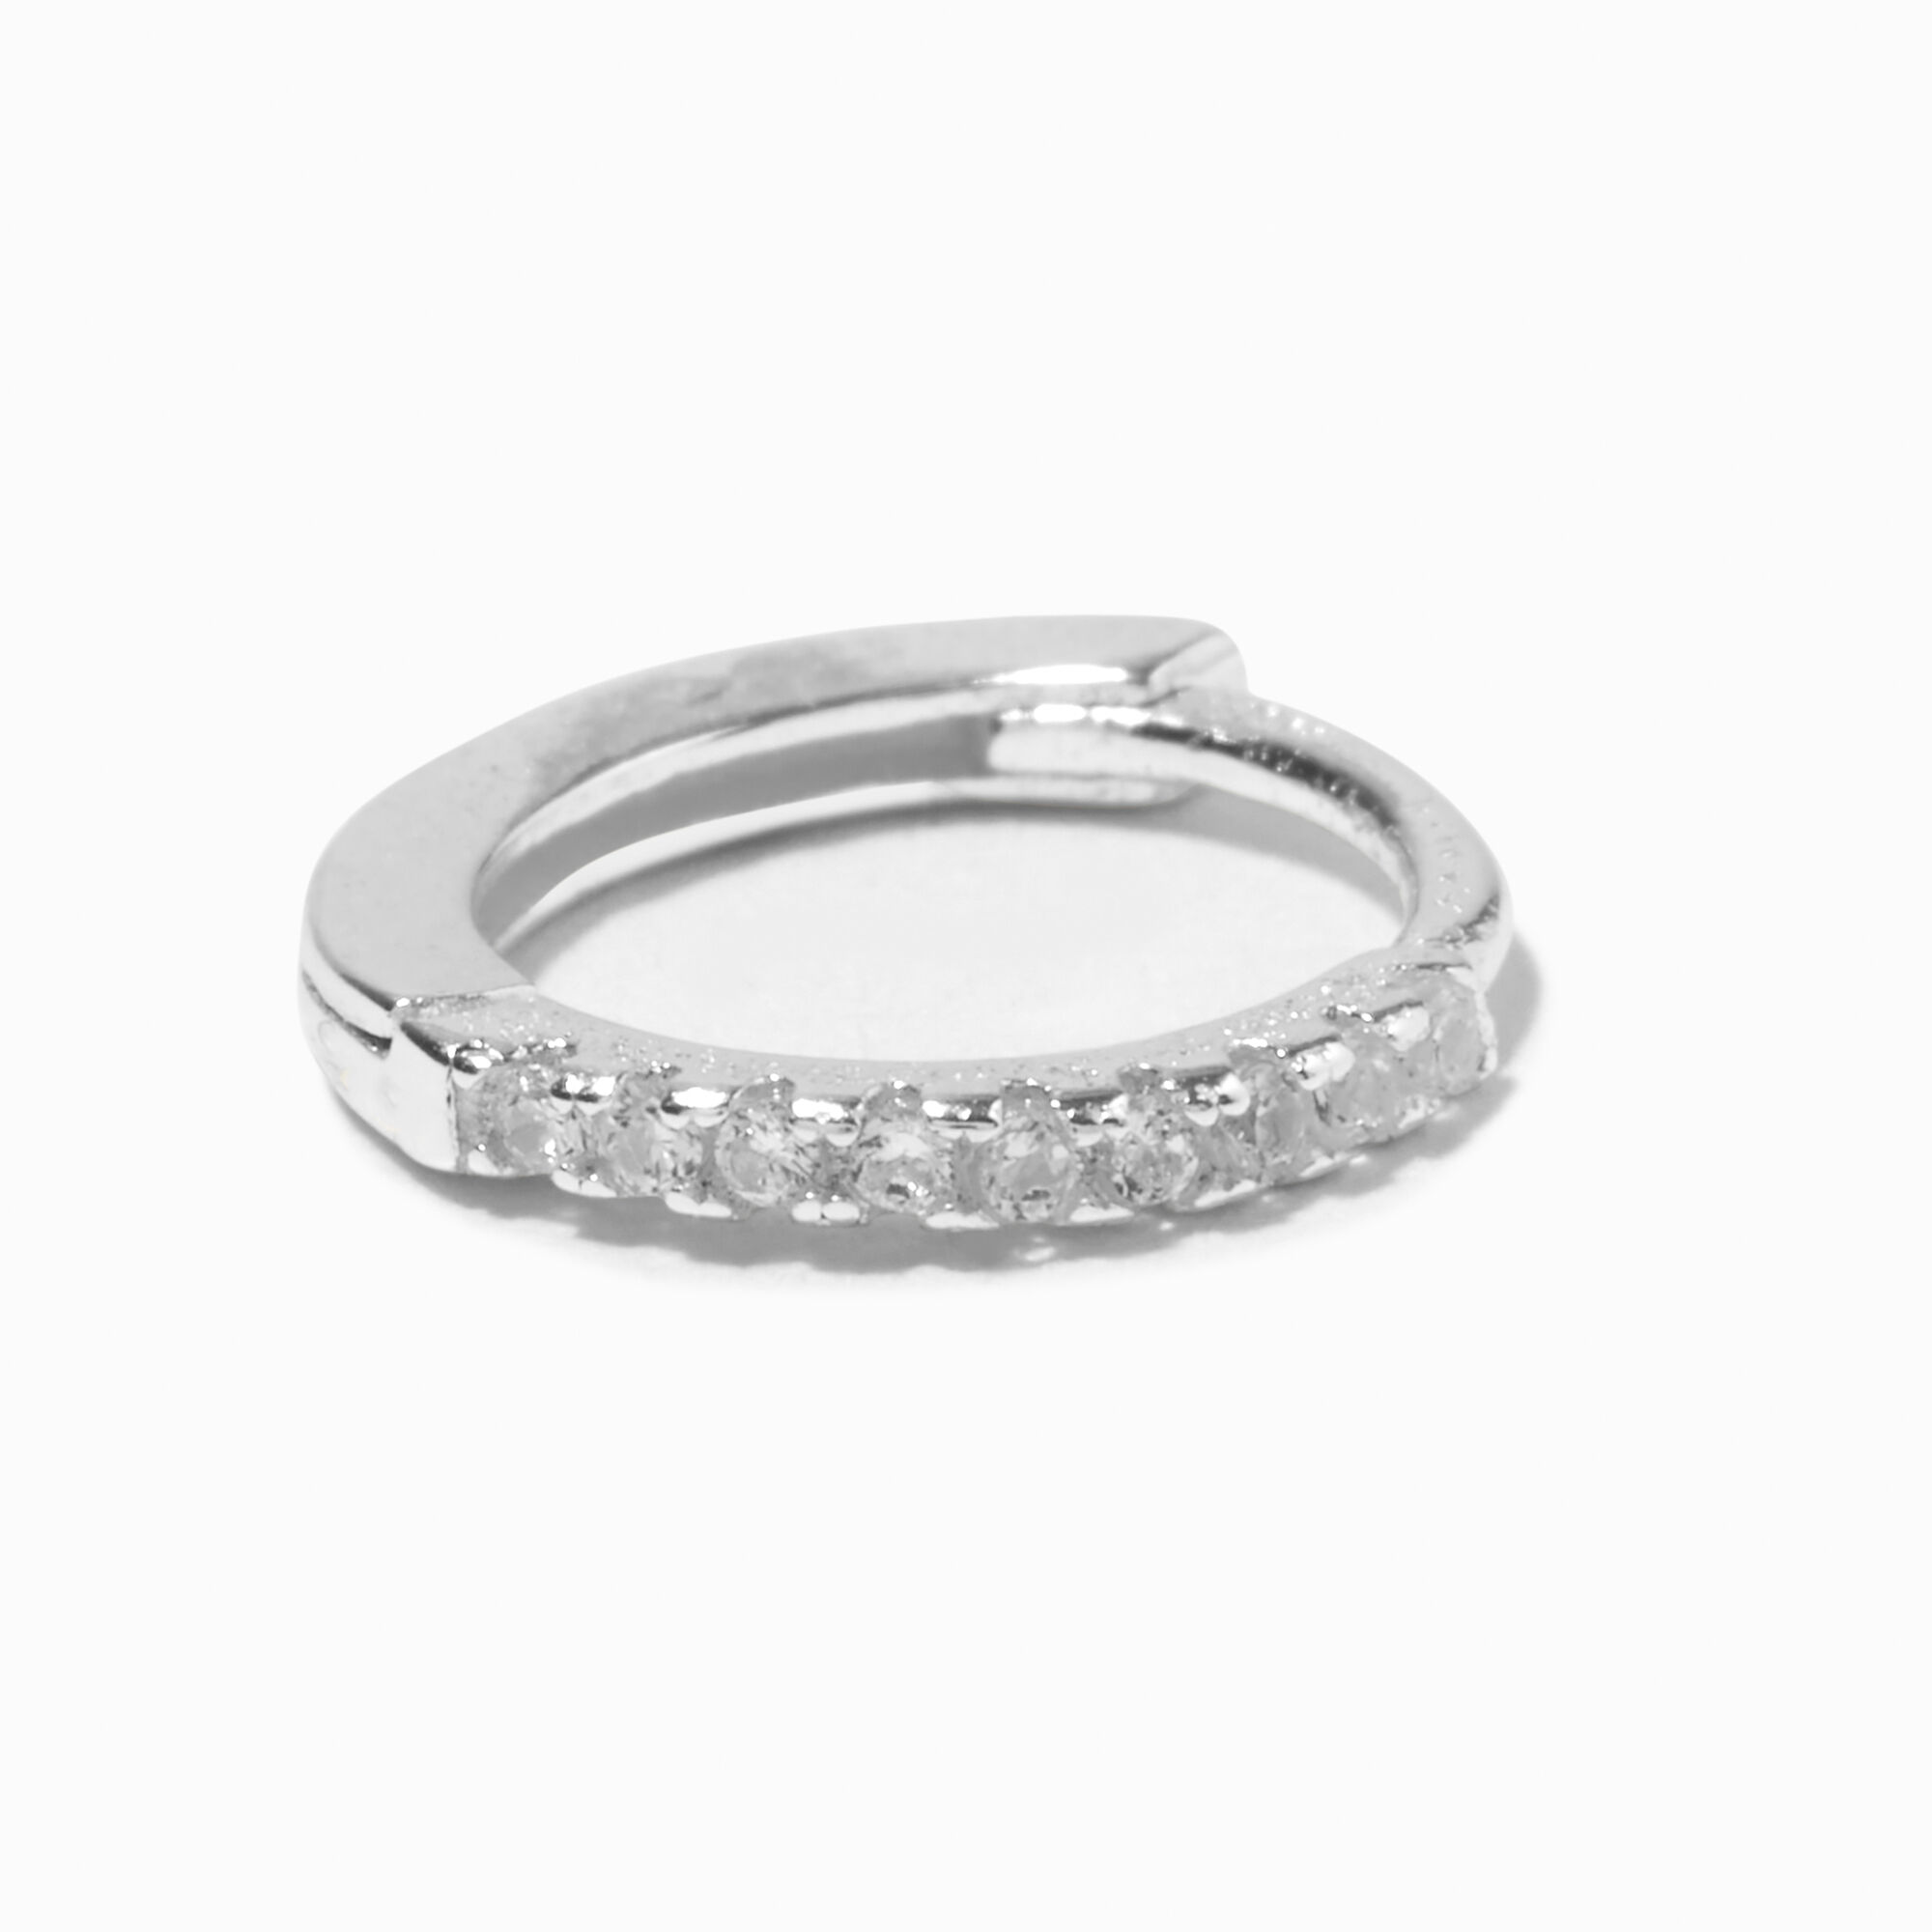 View Claires One 8MM Cubic Zirconia Pavé Hoop Earring Silver information